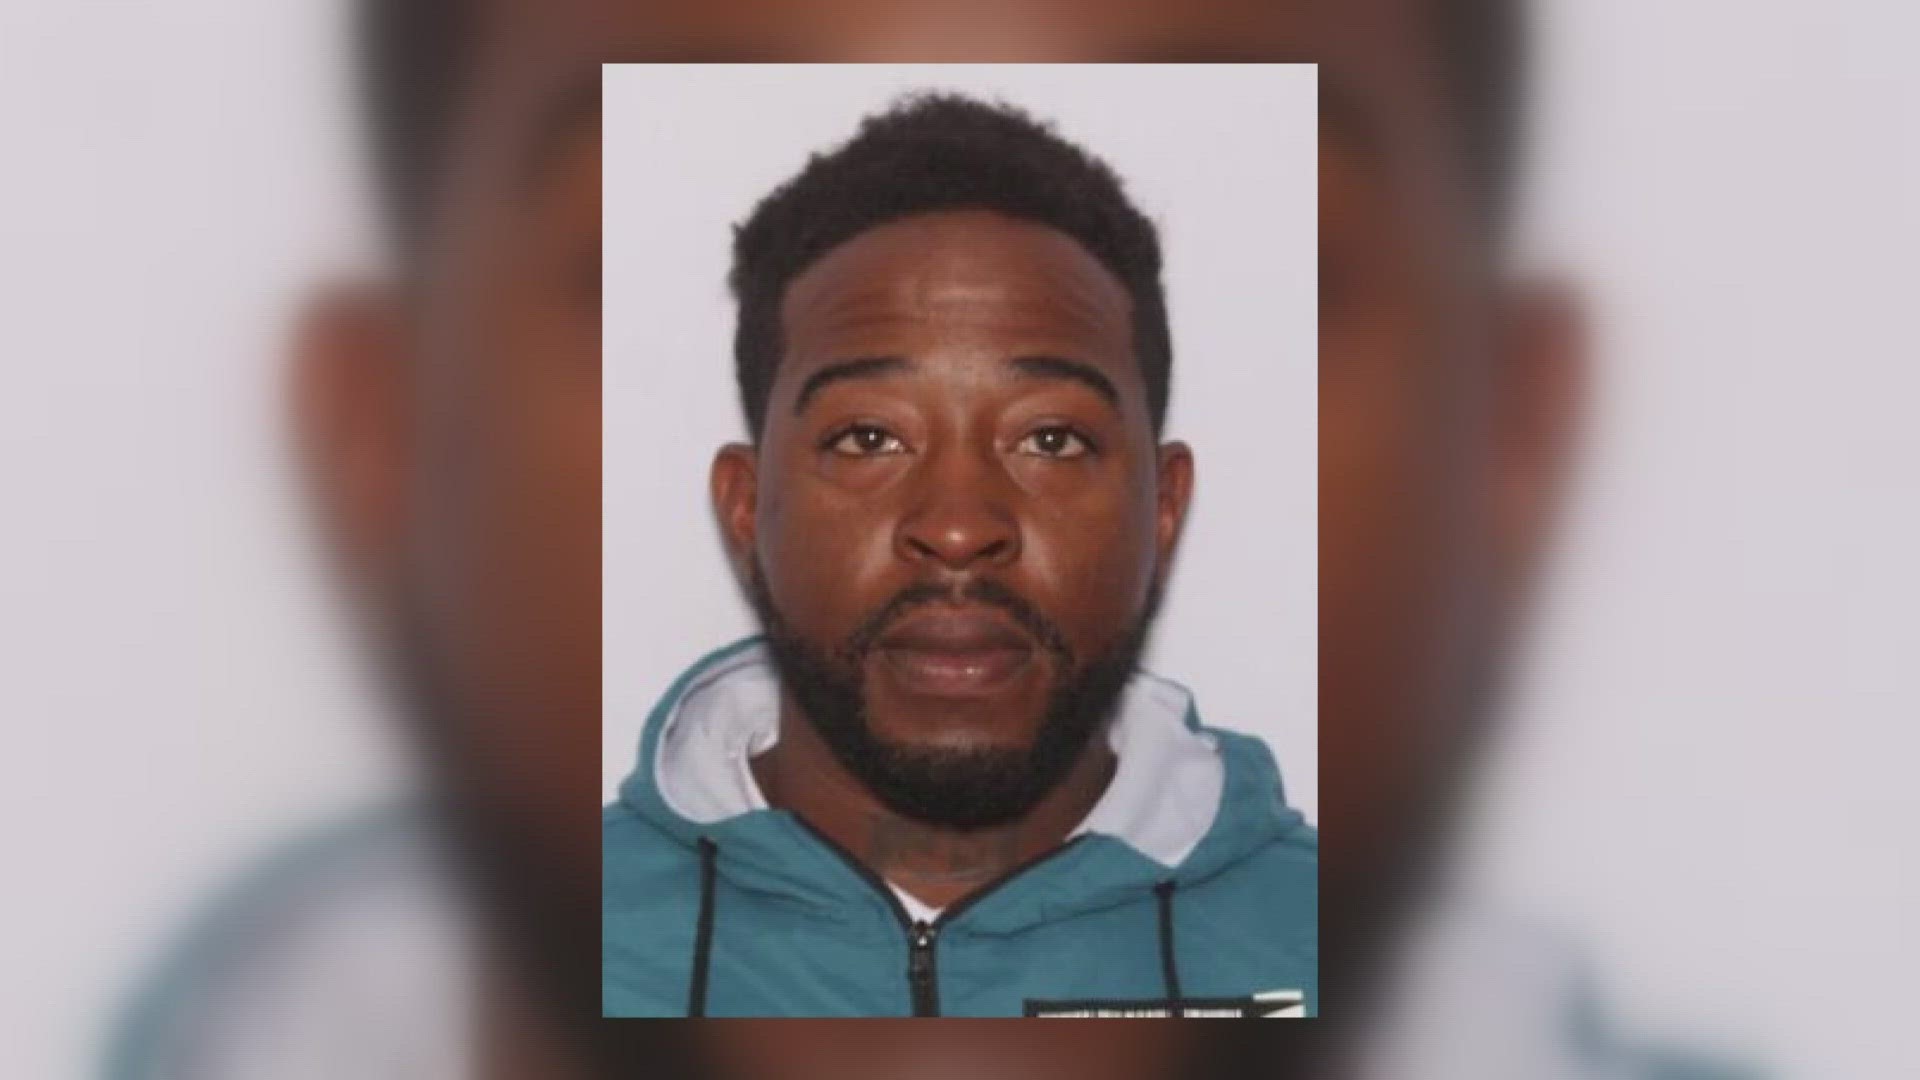 Devonte Parker, who is wanted for two separate homicides including the recent death of a 3-year-old child, has been arrested on Cleveland's east side.